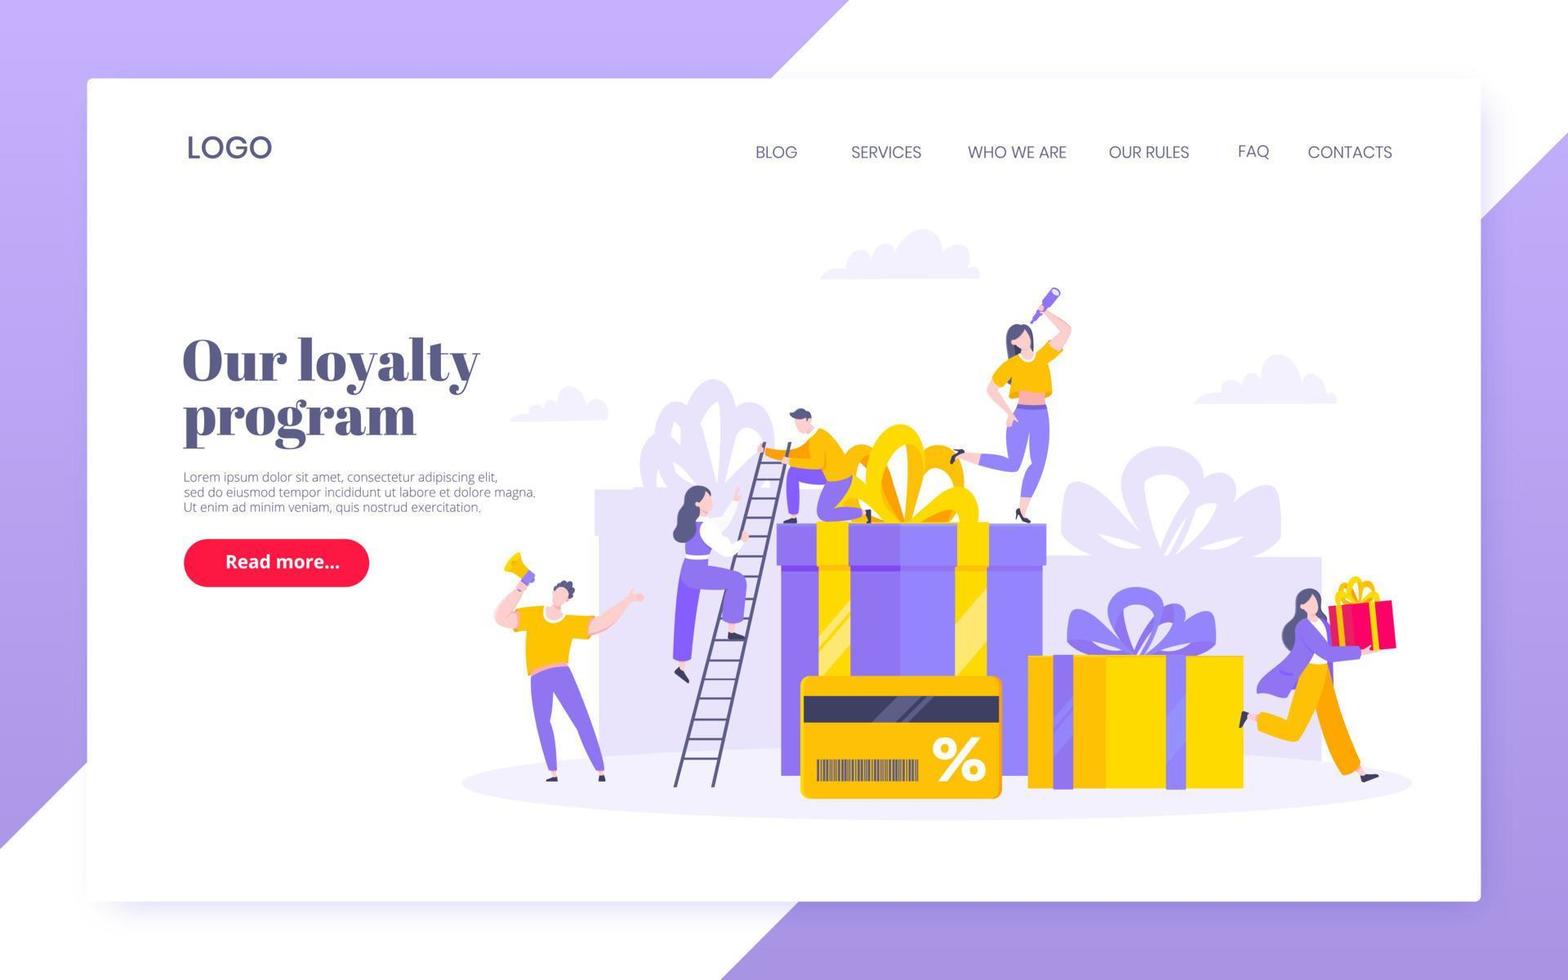 Earn loyalty program points and get online reward and gifts. vector